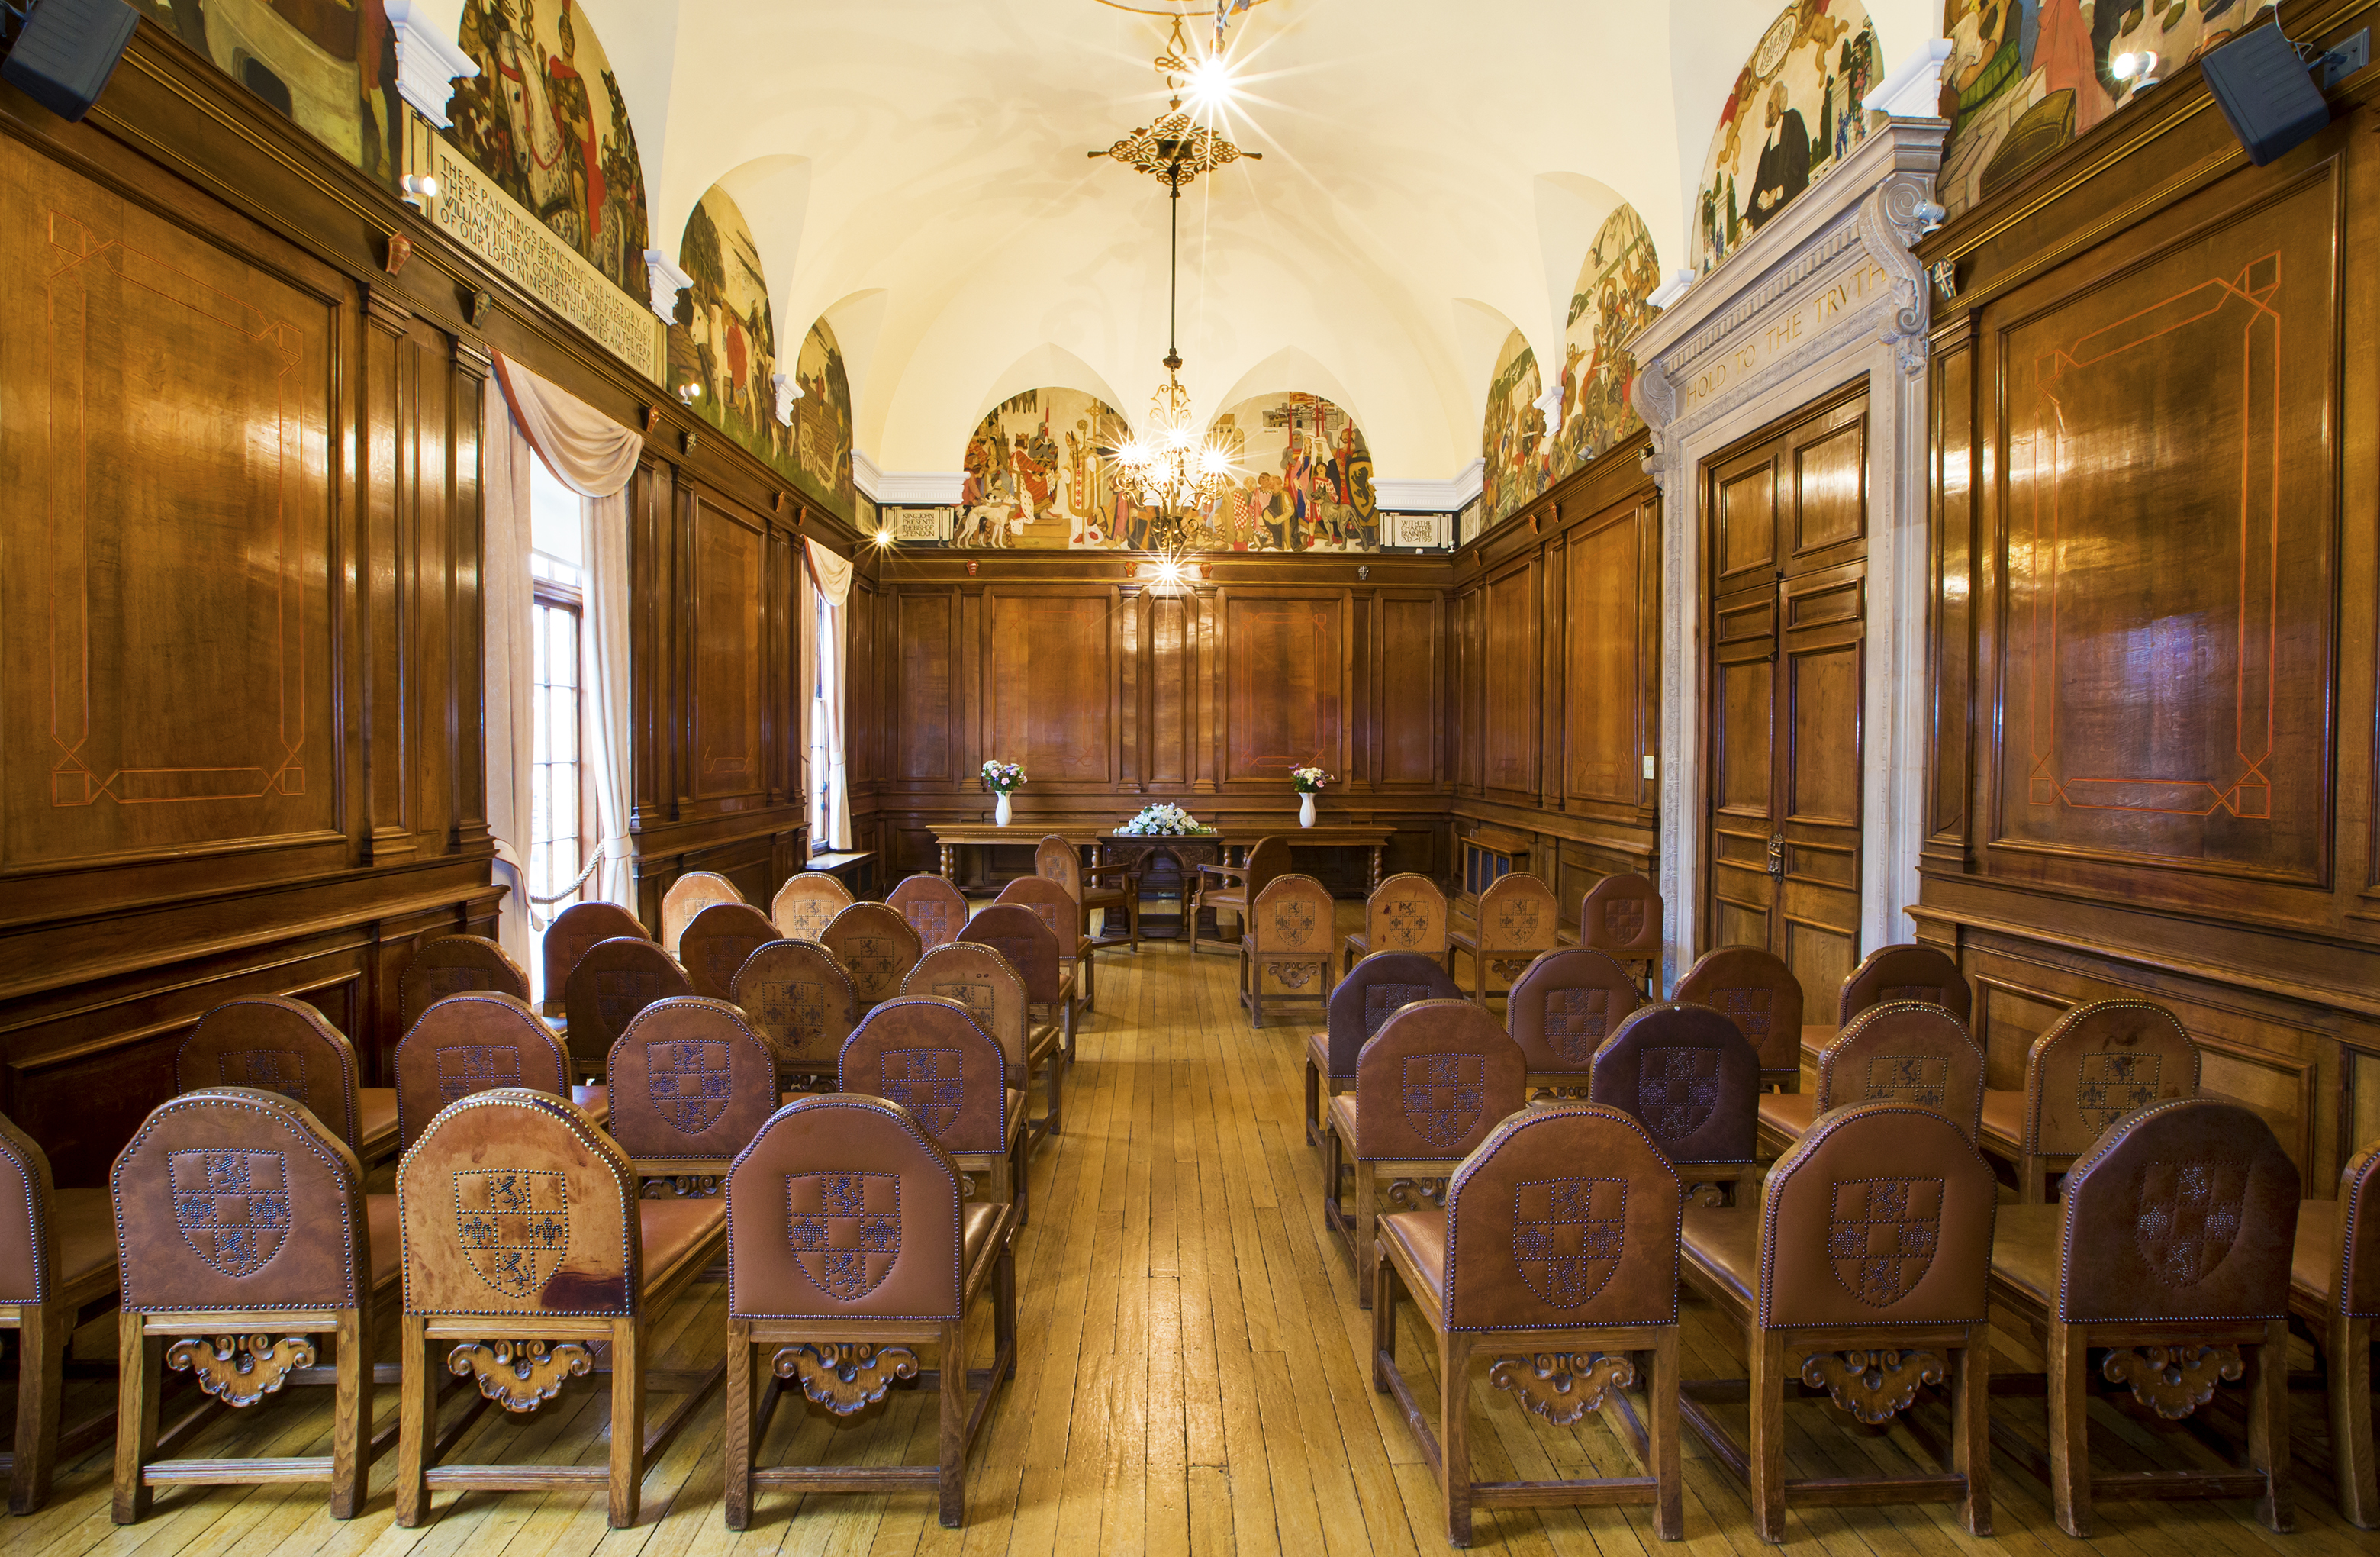 Image of council chamber room at the town hall